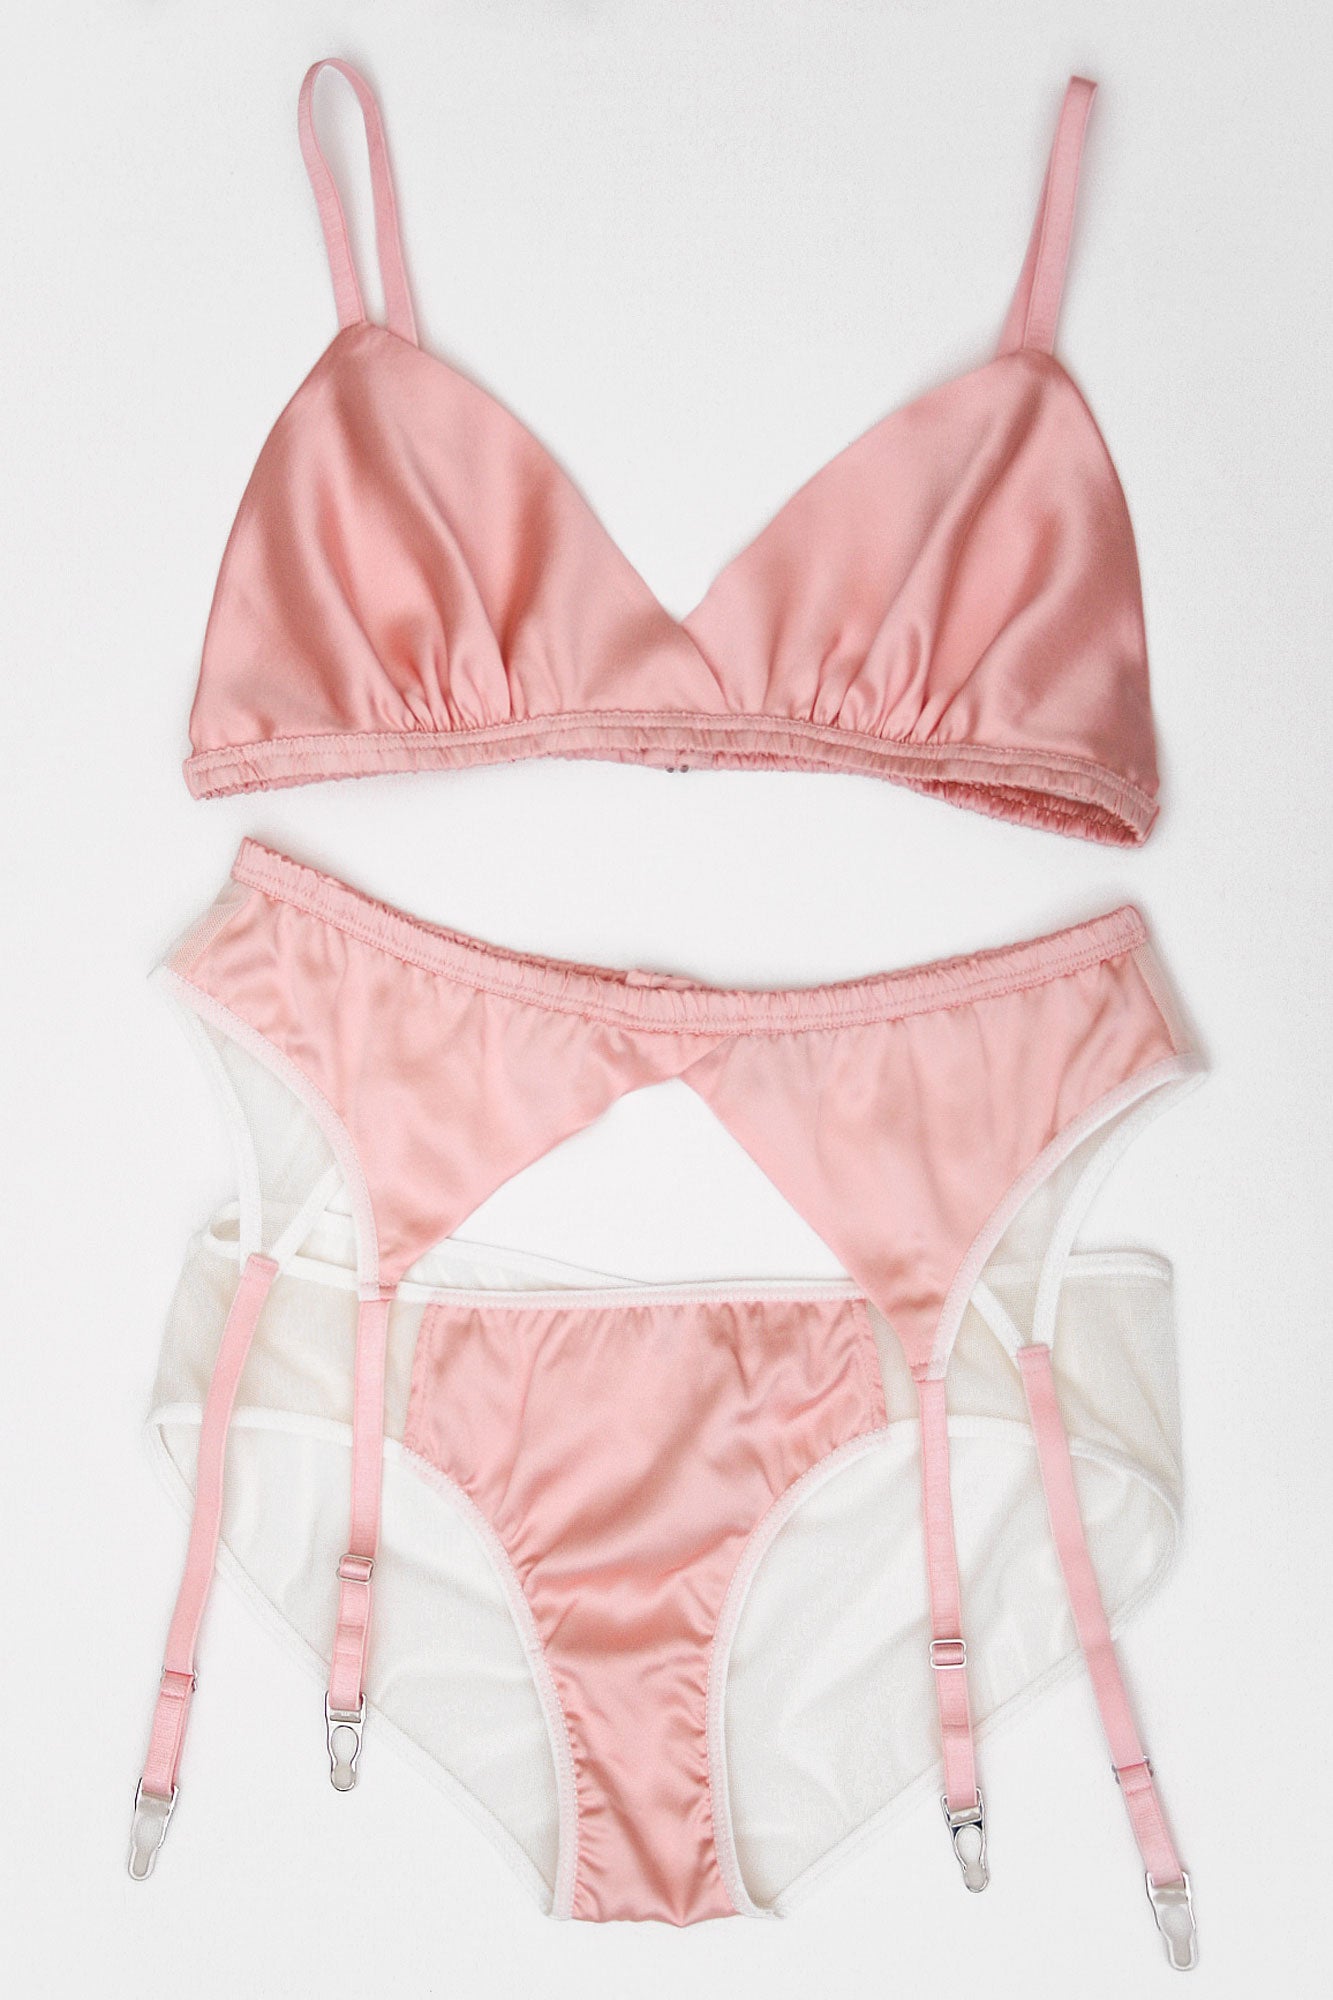 Pink Louisa bralette and panties set, made by hand in 100% silk satin